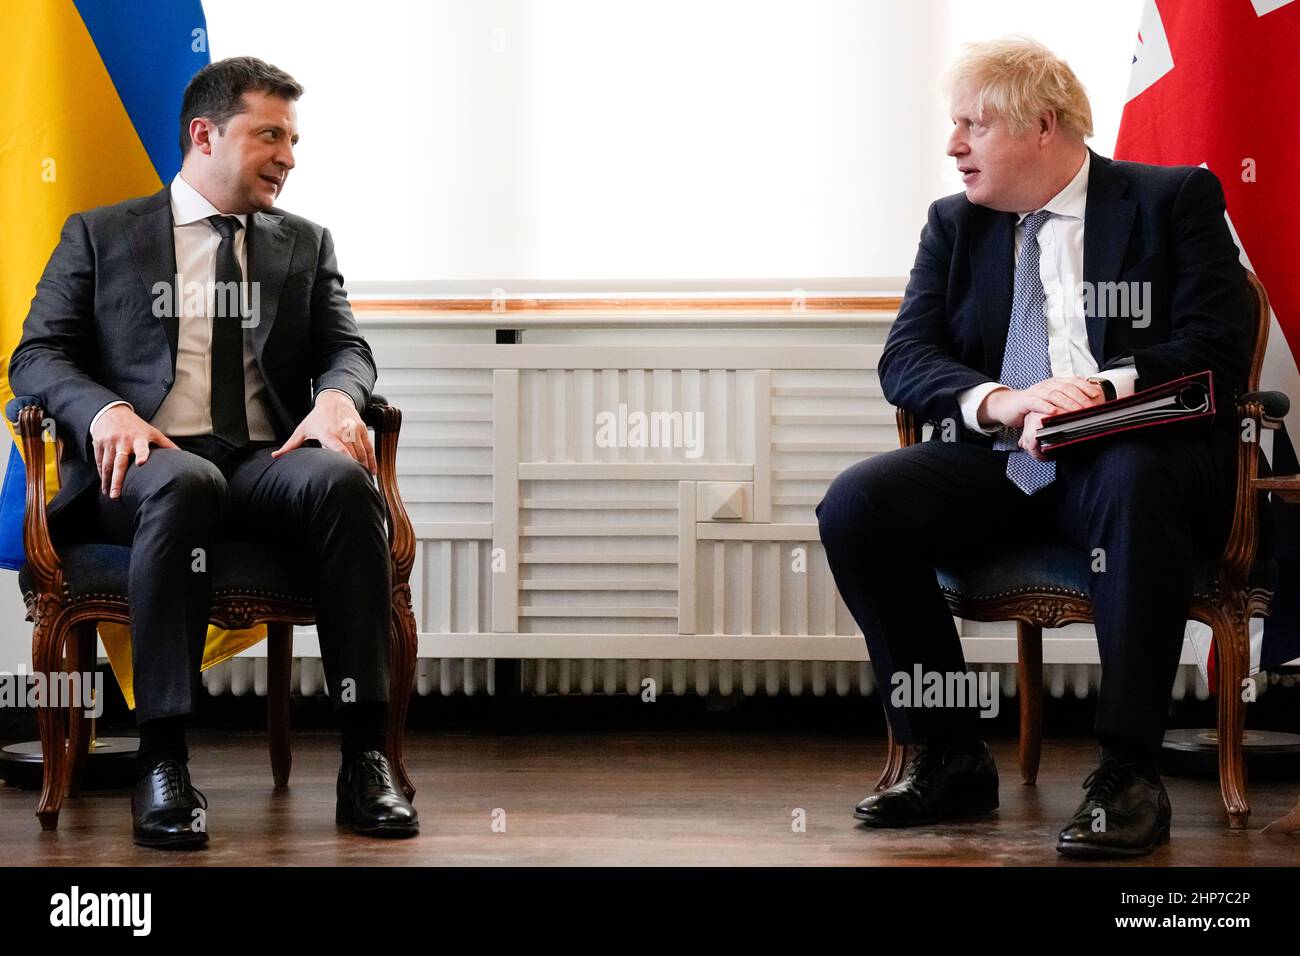 Ukrainian President Volodymyr Zelenskyy attends a meeting with Prime Minister Boris Johnson at the Munich Security Conference in Germany where the Prime Minister is meeting with world leaders to discuss tensions in eastern Europe. Picture date: Saturday February 19, 2022. Stock Photo